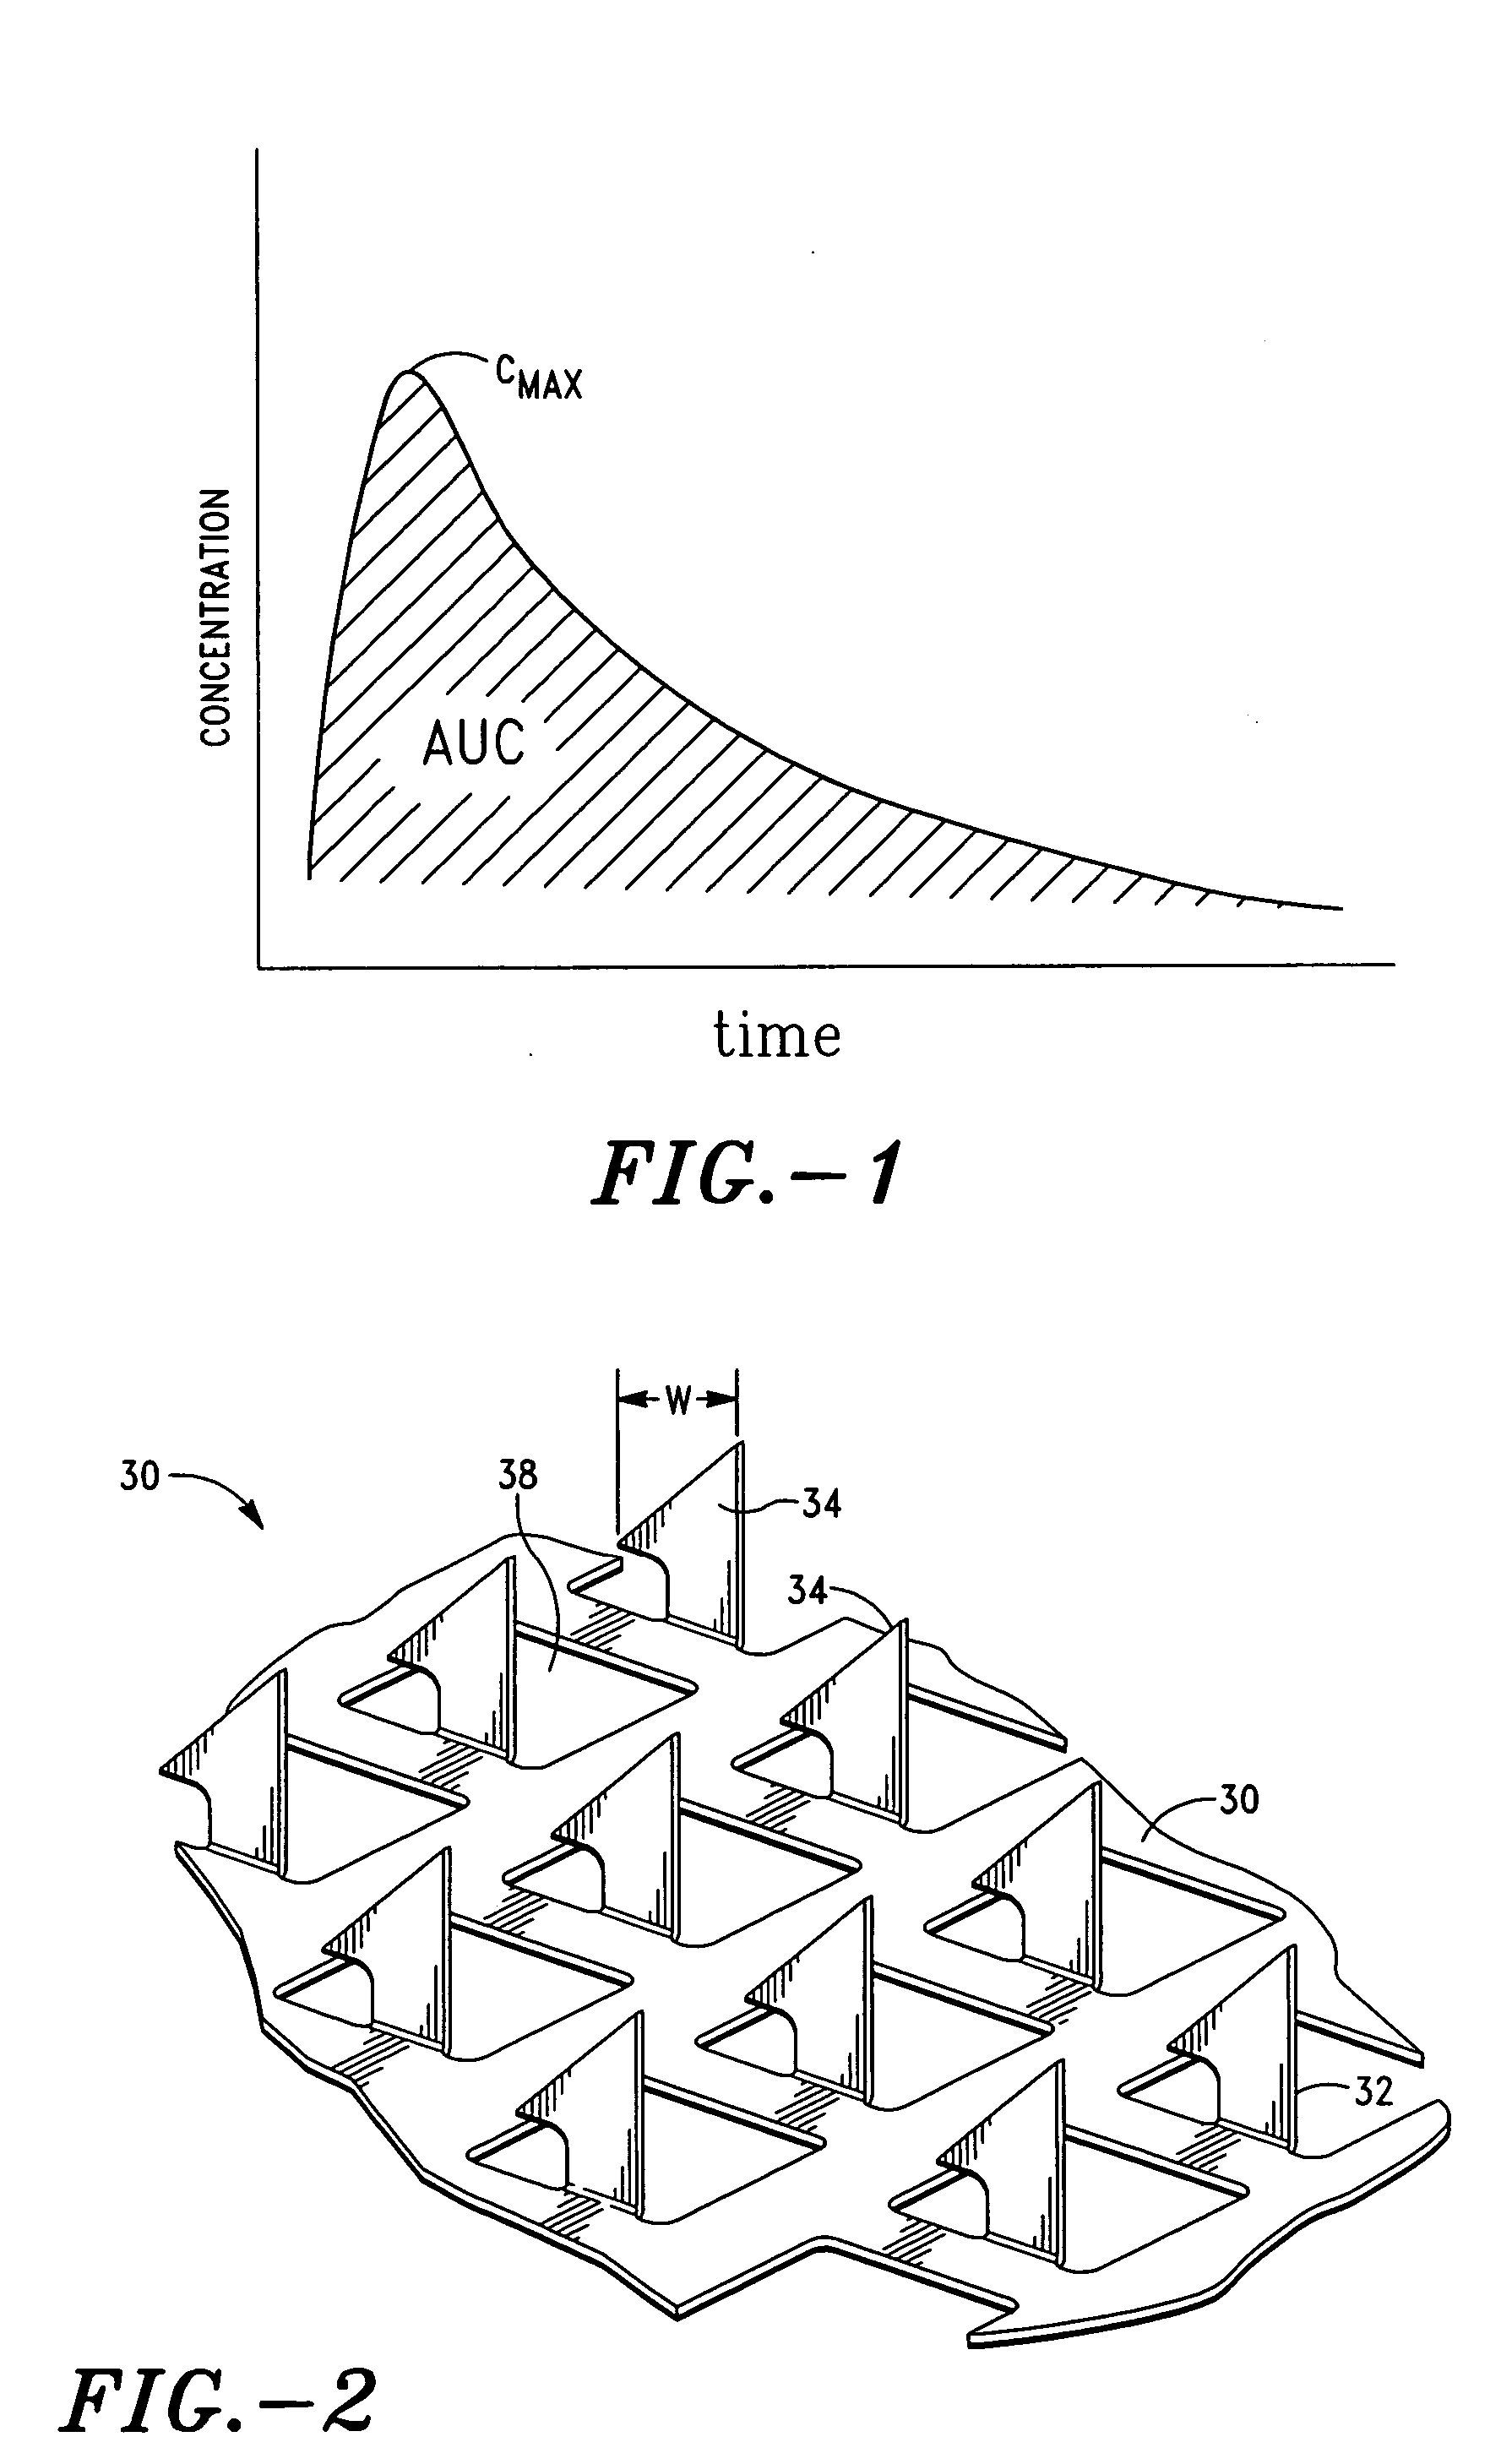 Apparatus and method for transdermal delivery of desmopressin